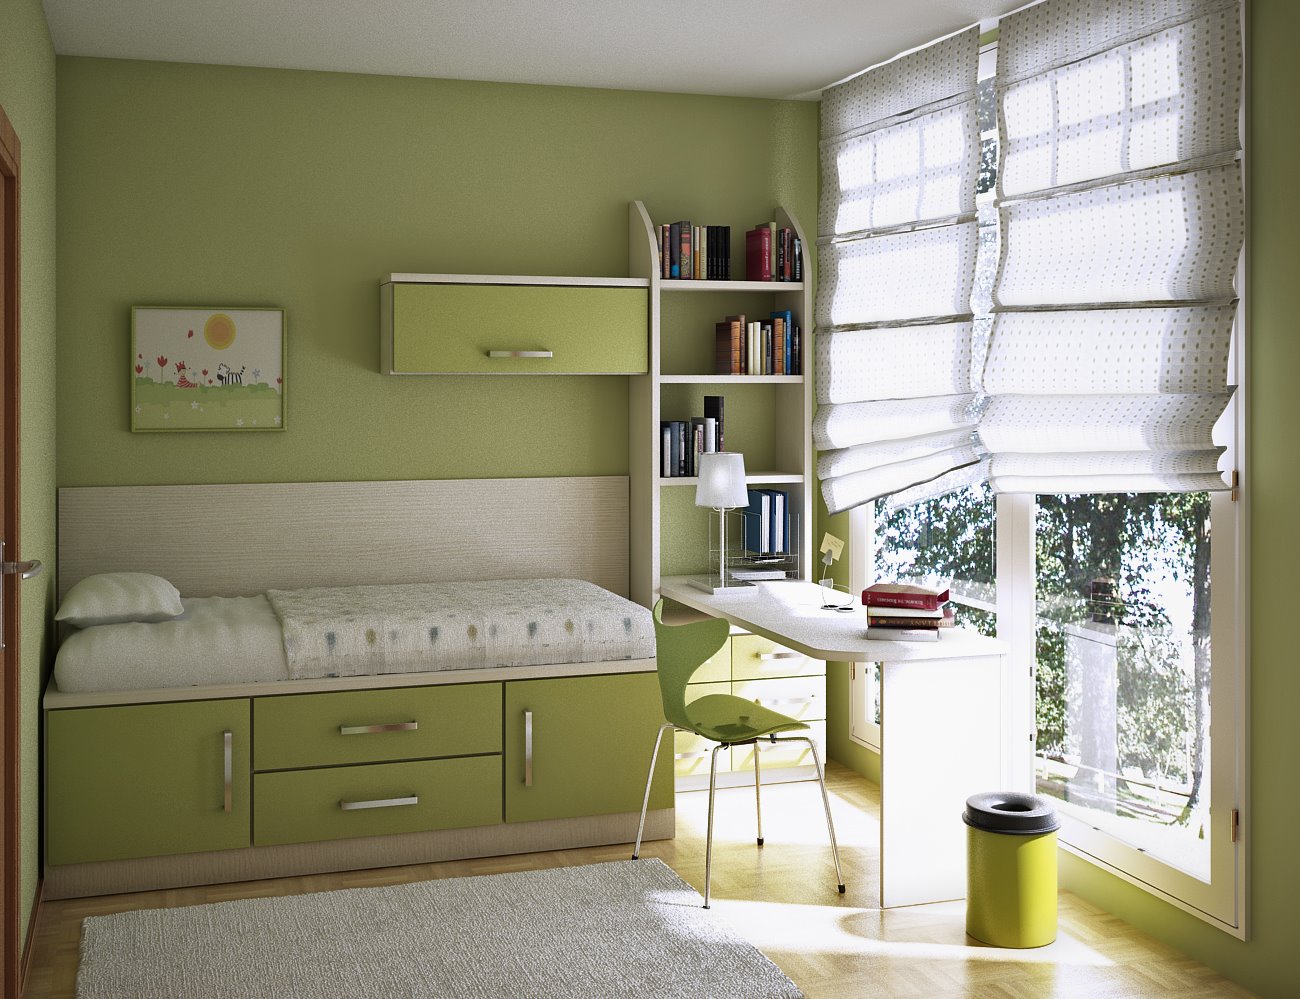 Teen Girl Bedroom Ideas for a Small Room